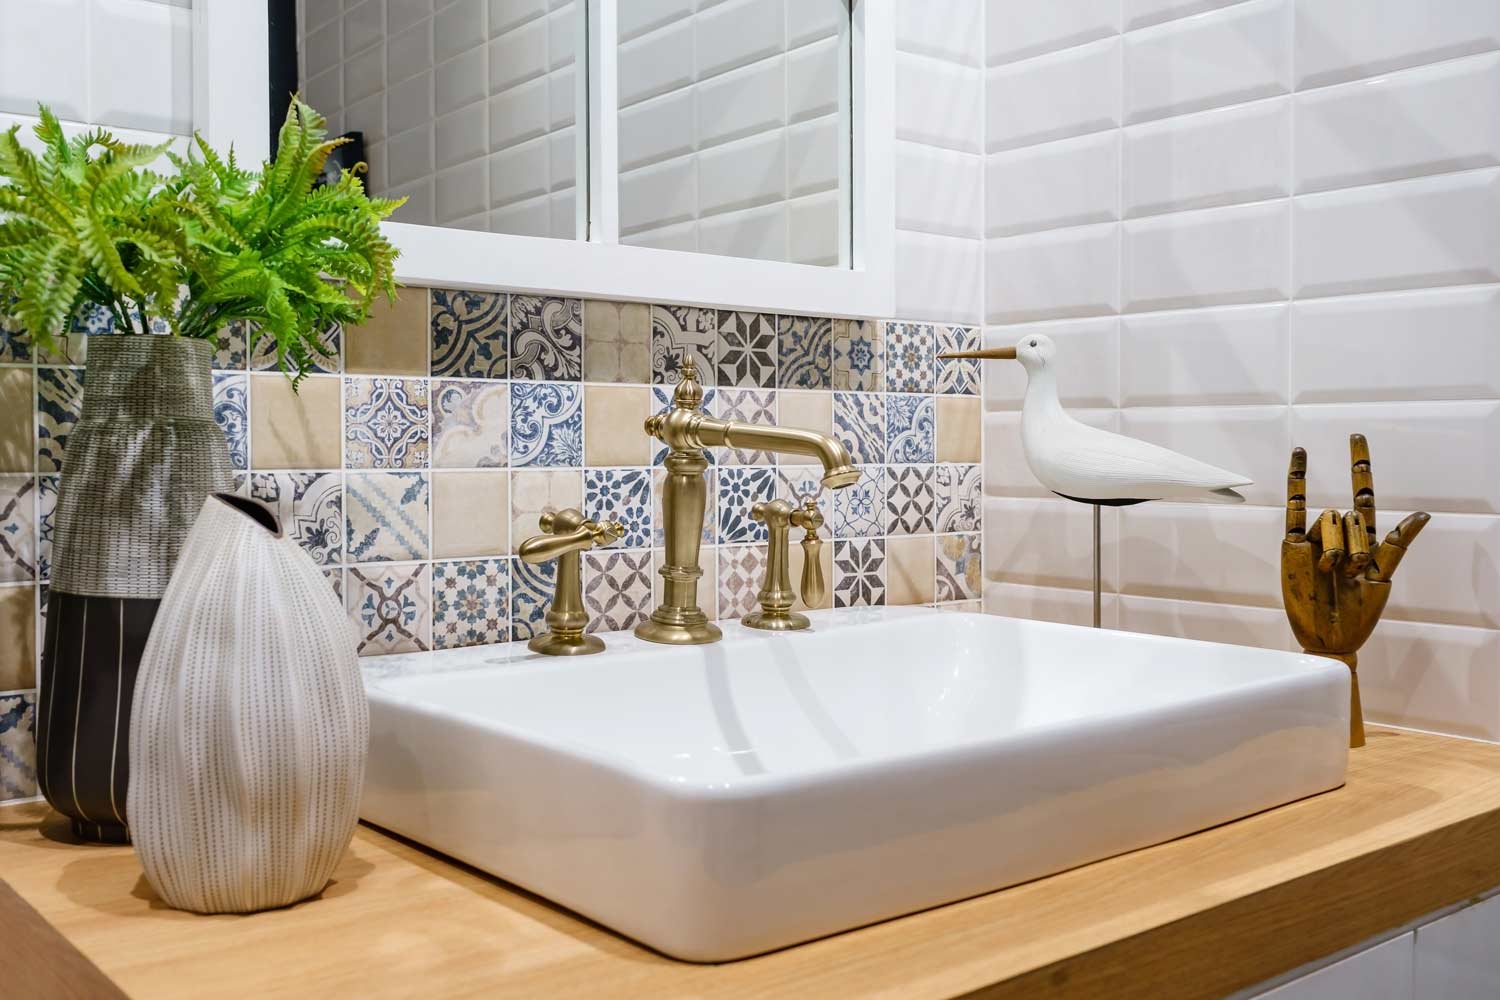 An Ultimate Guide To Subway Tile Design, Subway Tile Ideas